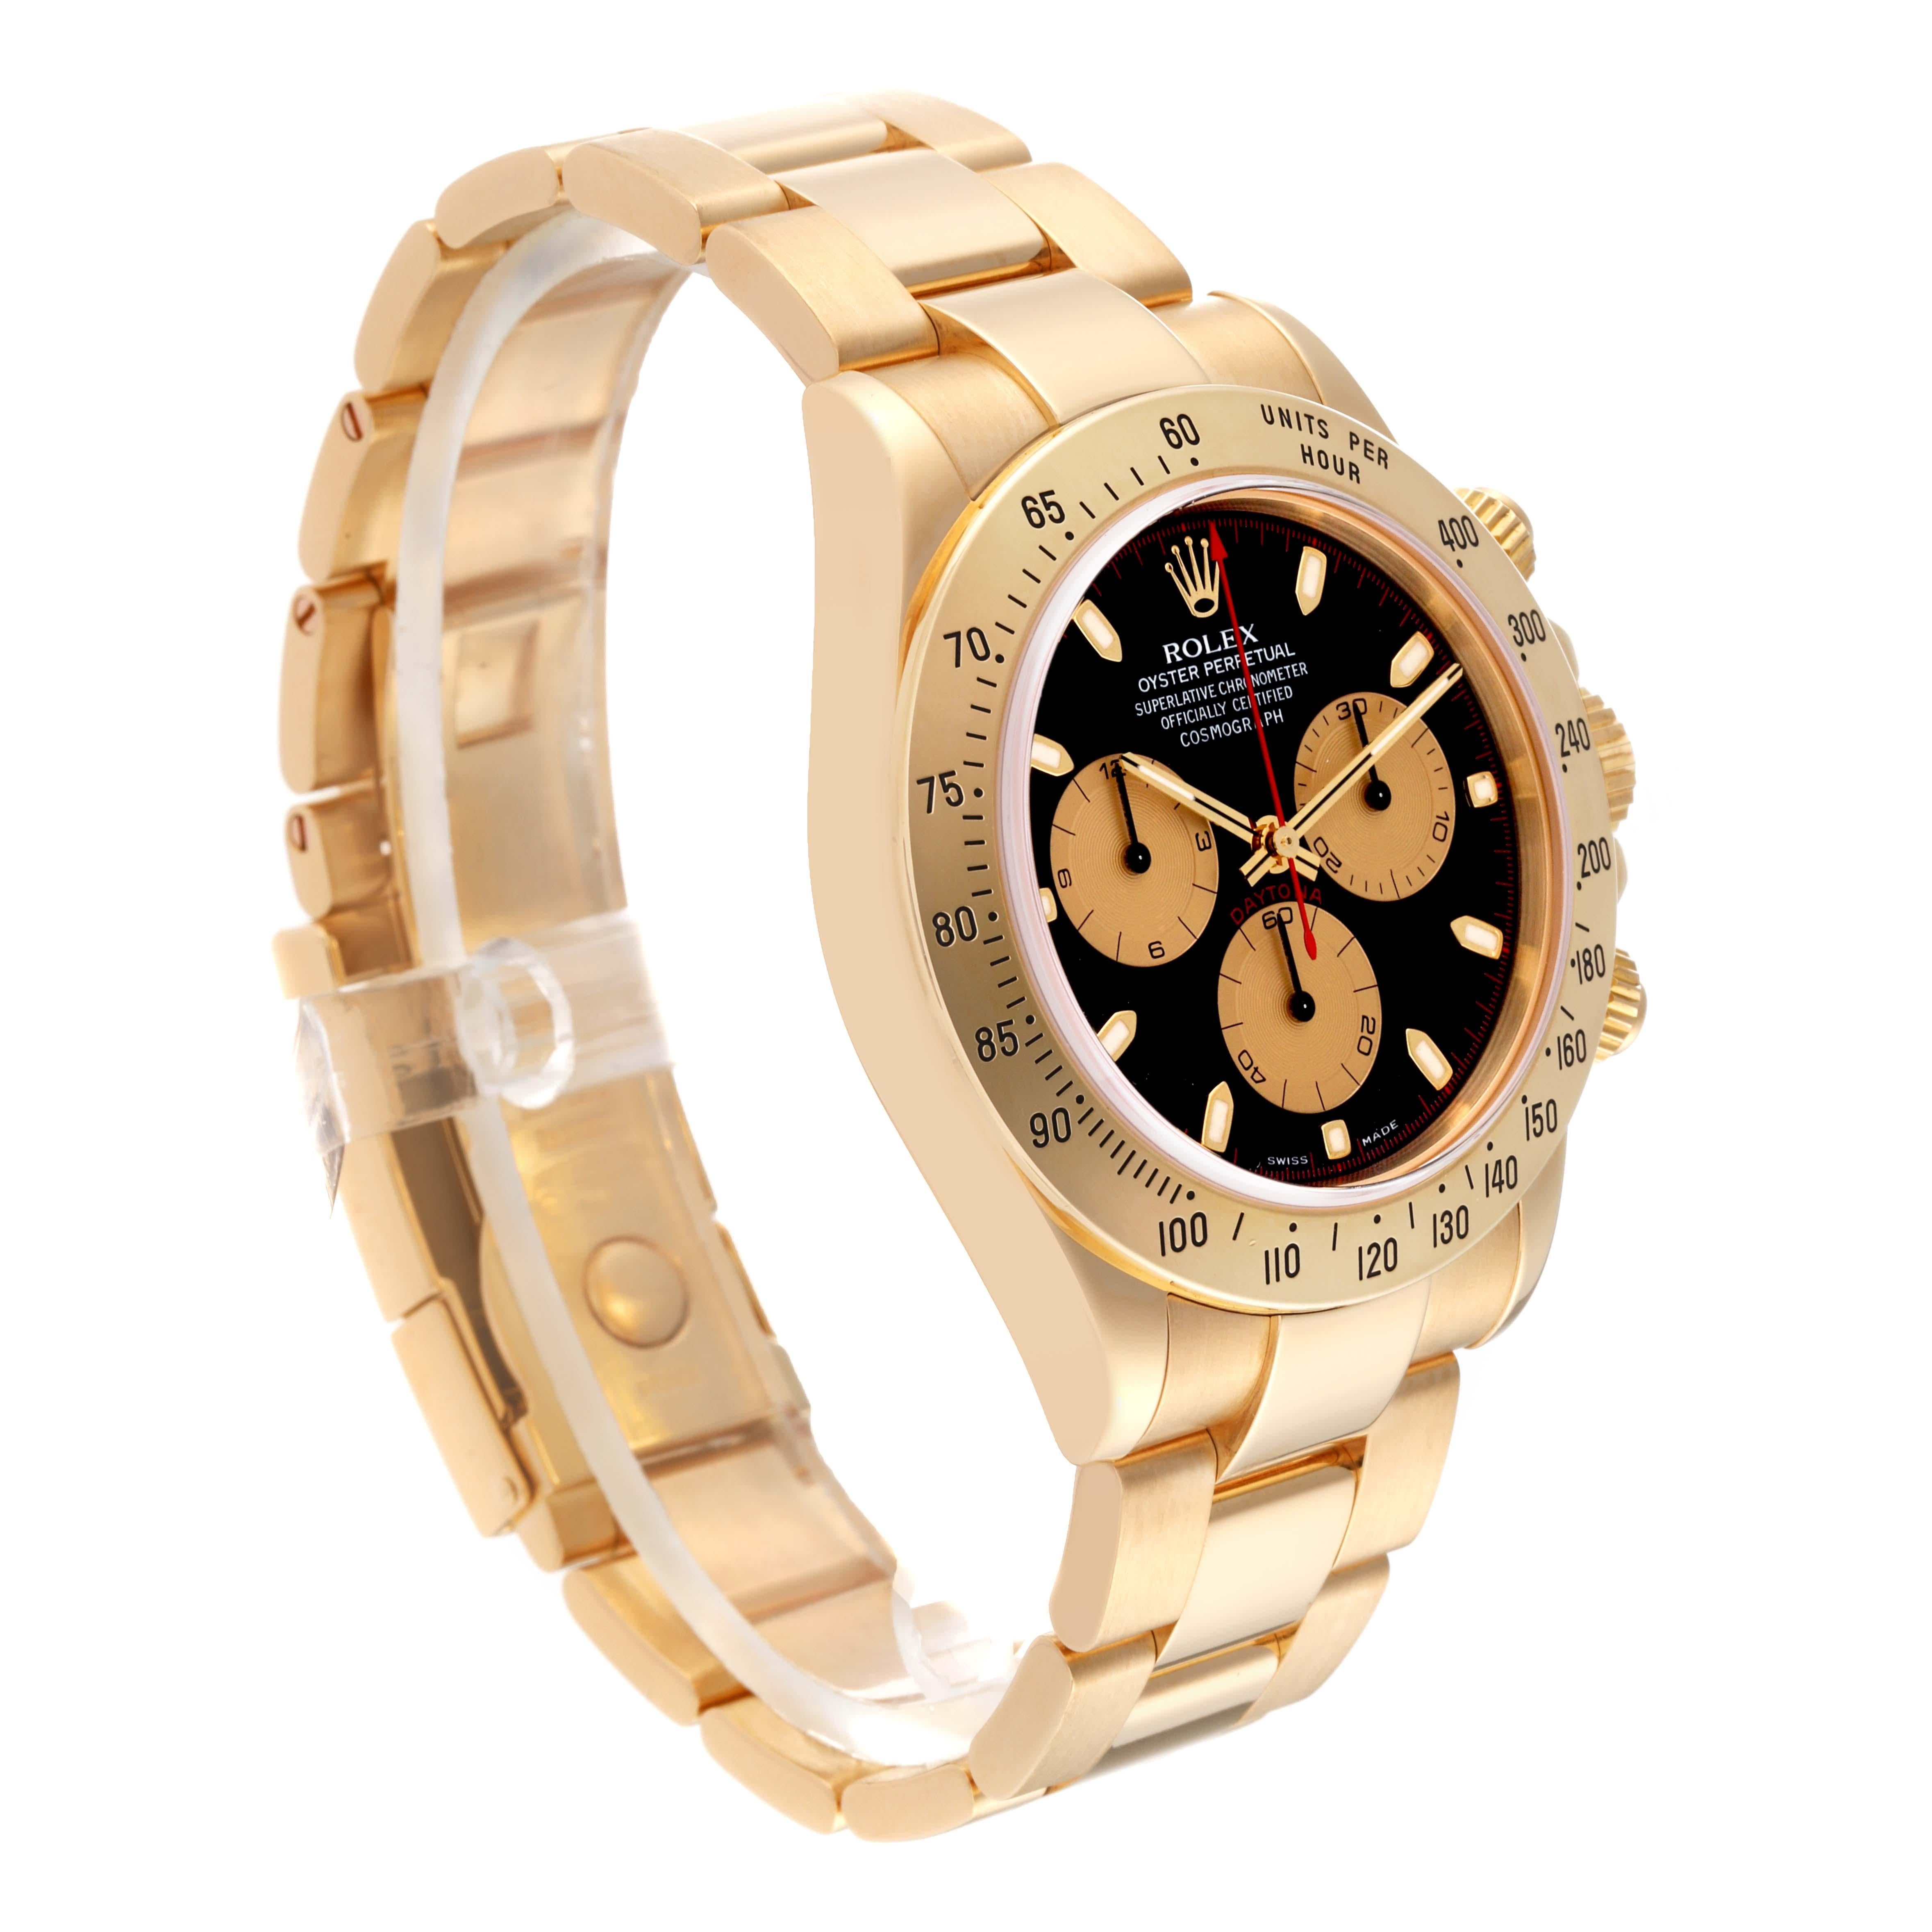 Rolex Cosmograph Daytona Yellow Gold Black Dial Mens Watch 116528 For Sale 3